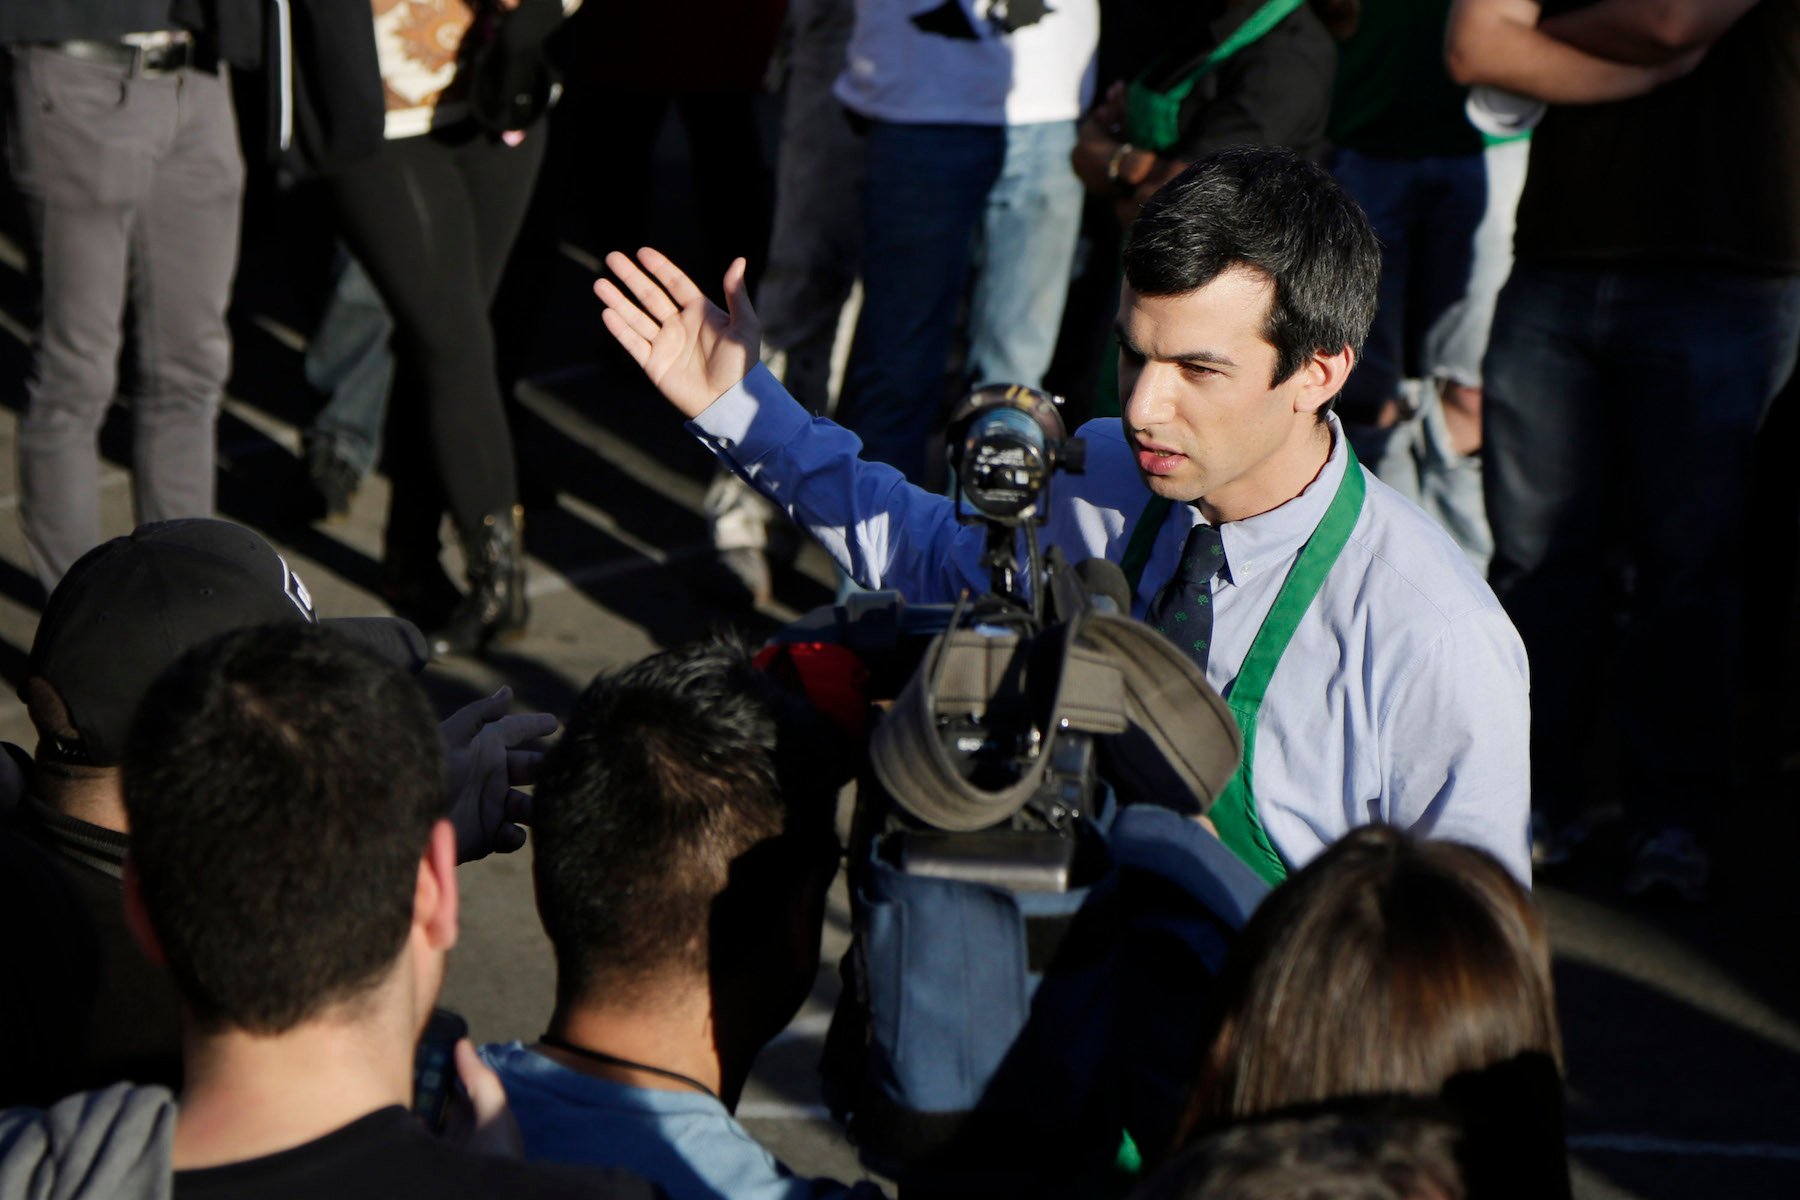 Nathan Fielder, host of 'Nathan For You,' dressed in a Starbucks uniform in a crowd